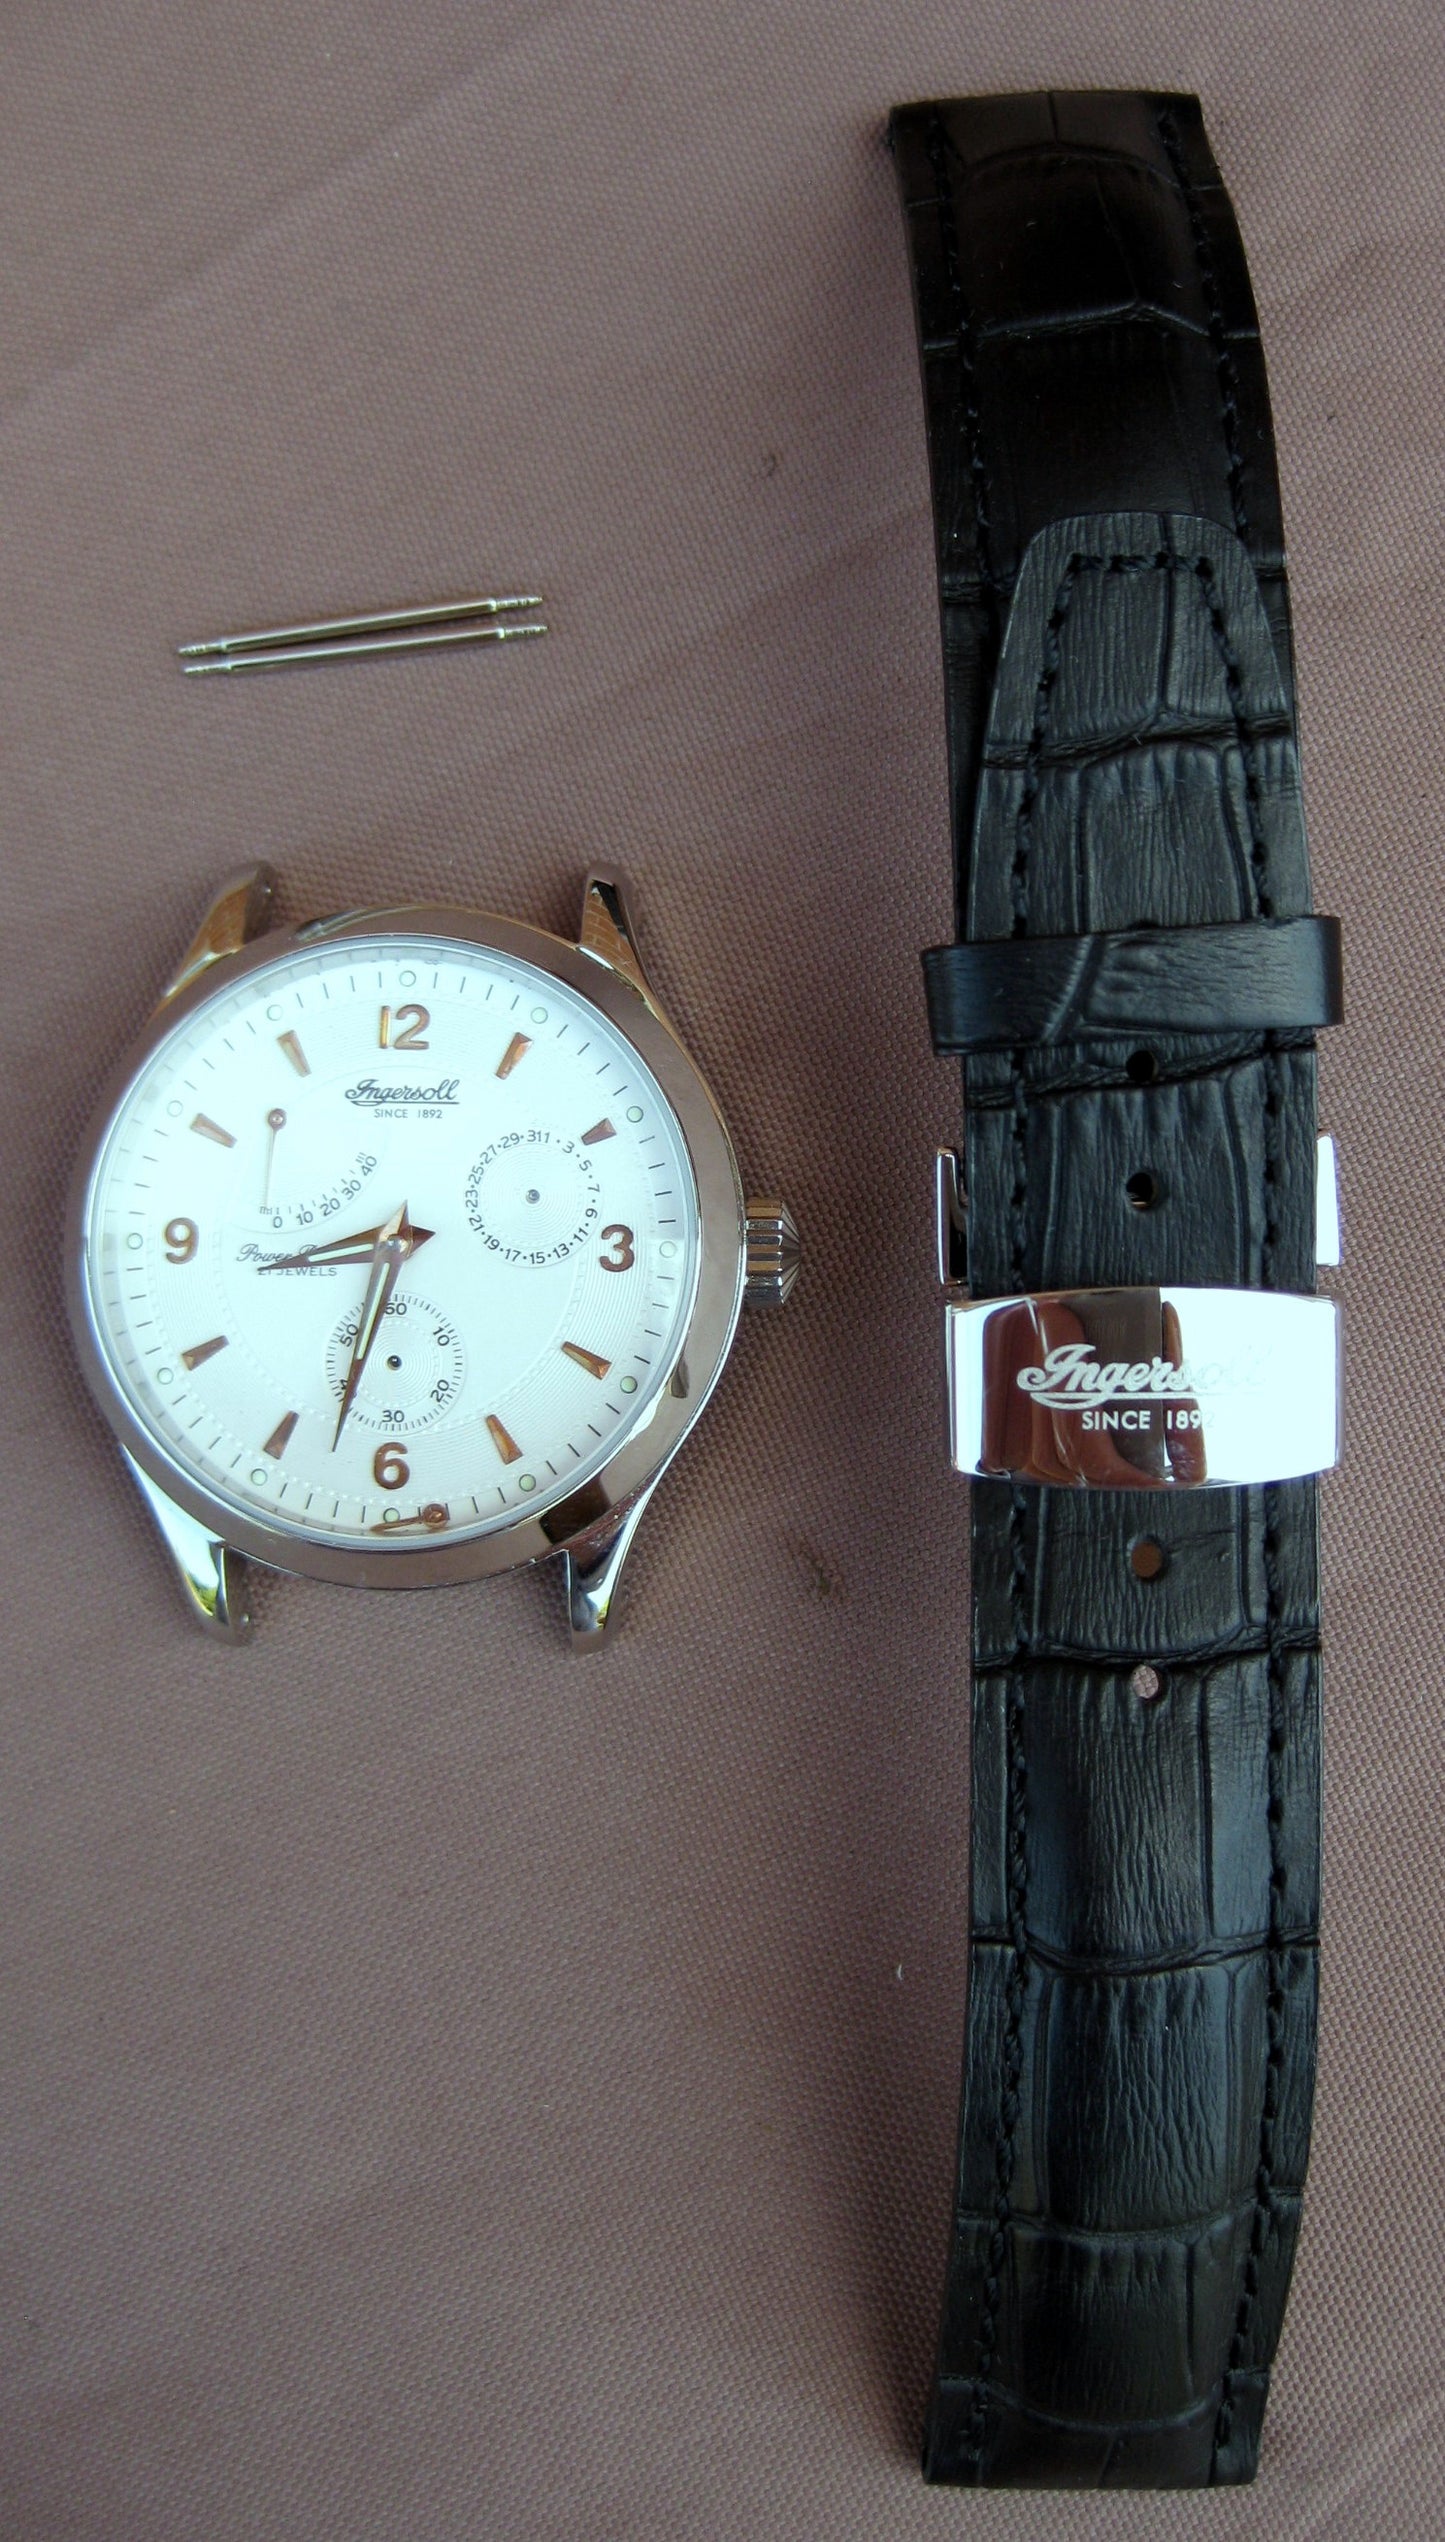 Ingersoll Automatic Watch Calibre 644 IN4000